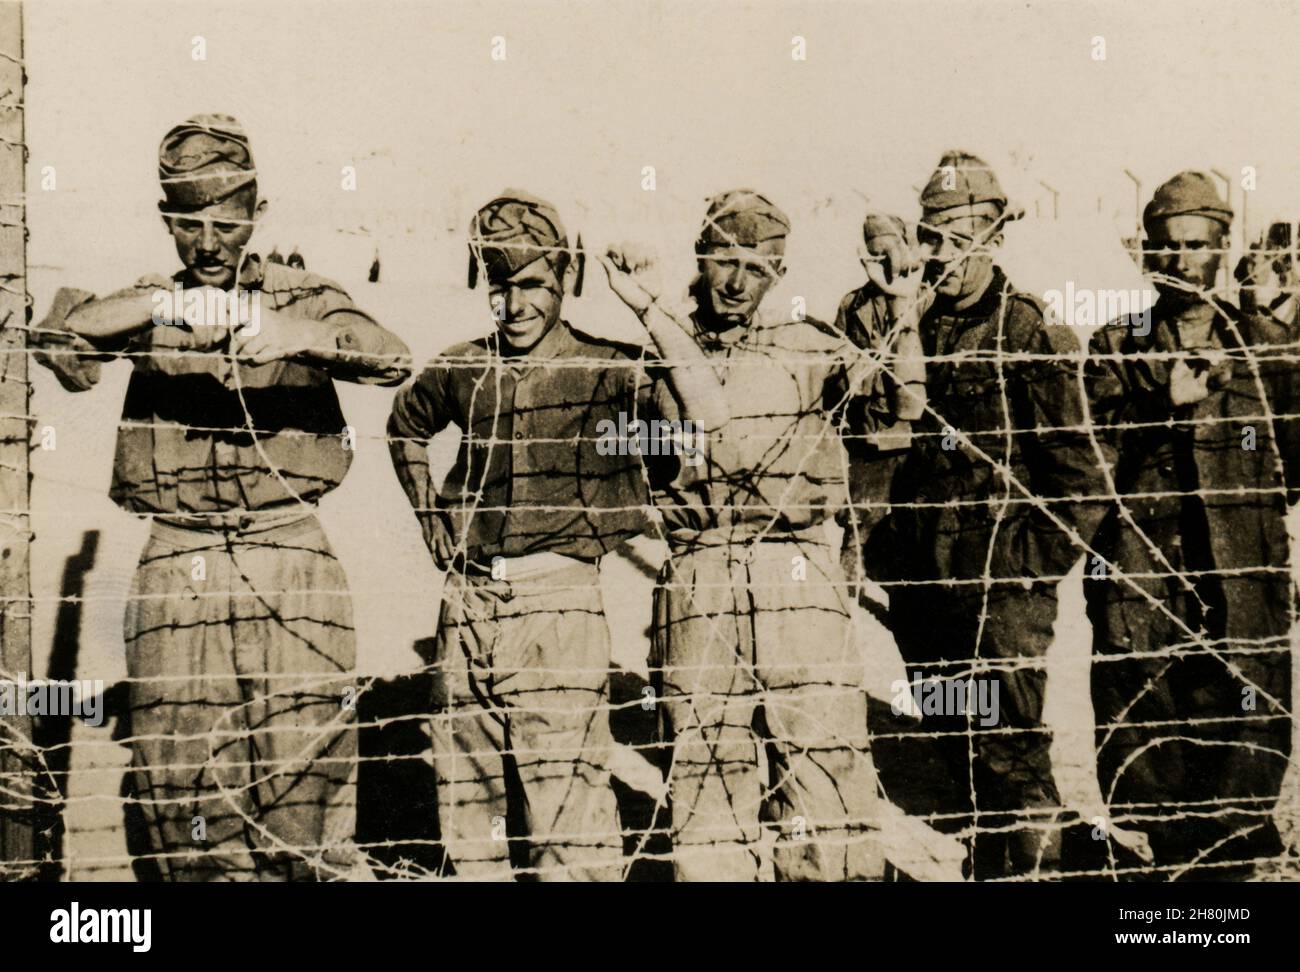 The photo's original caption is ' Italian prisoners'. It was taken by a British Army soldier who fought in Egypt, Libya, Tunisia and Italy from 1941-1945. Stock Photo